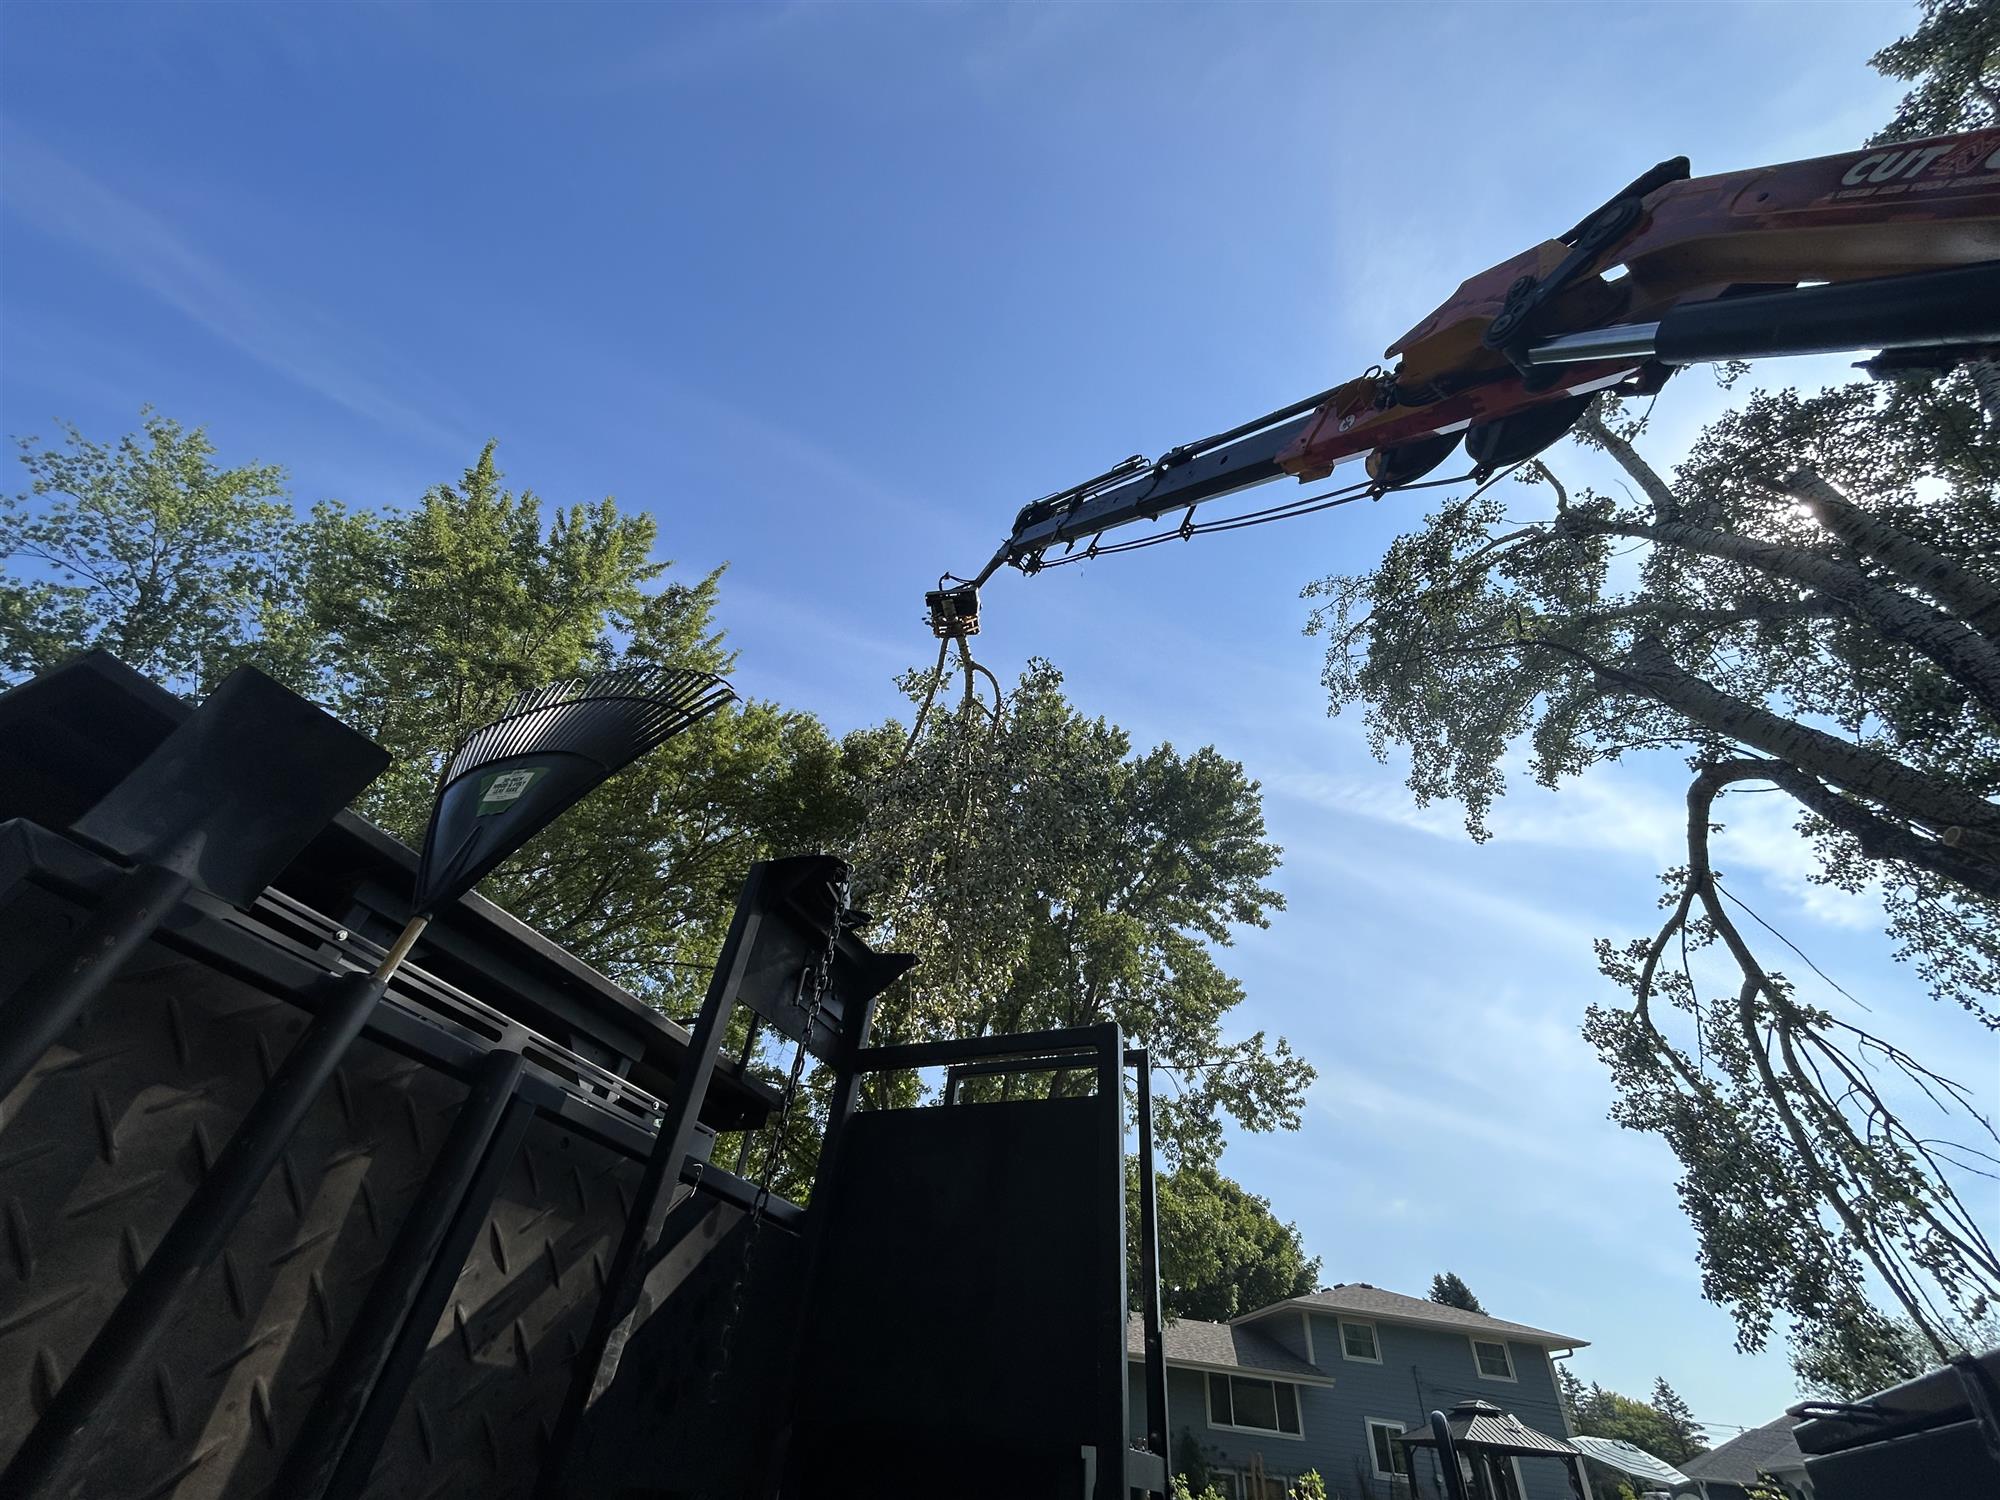 Madison Commercial Tree Removal - Affordable and Safe Solutions.